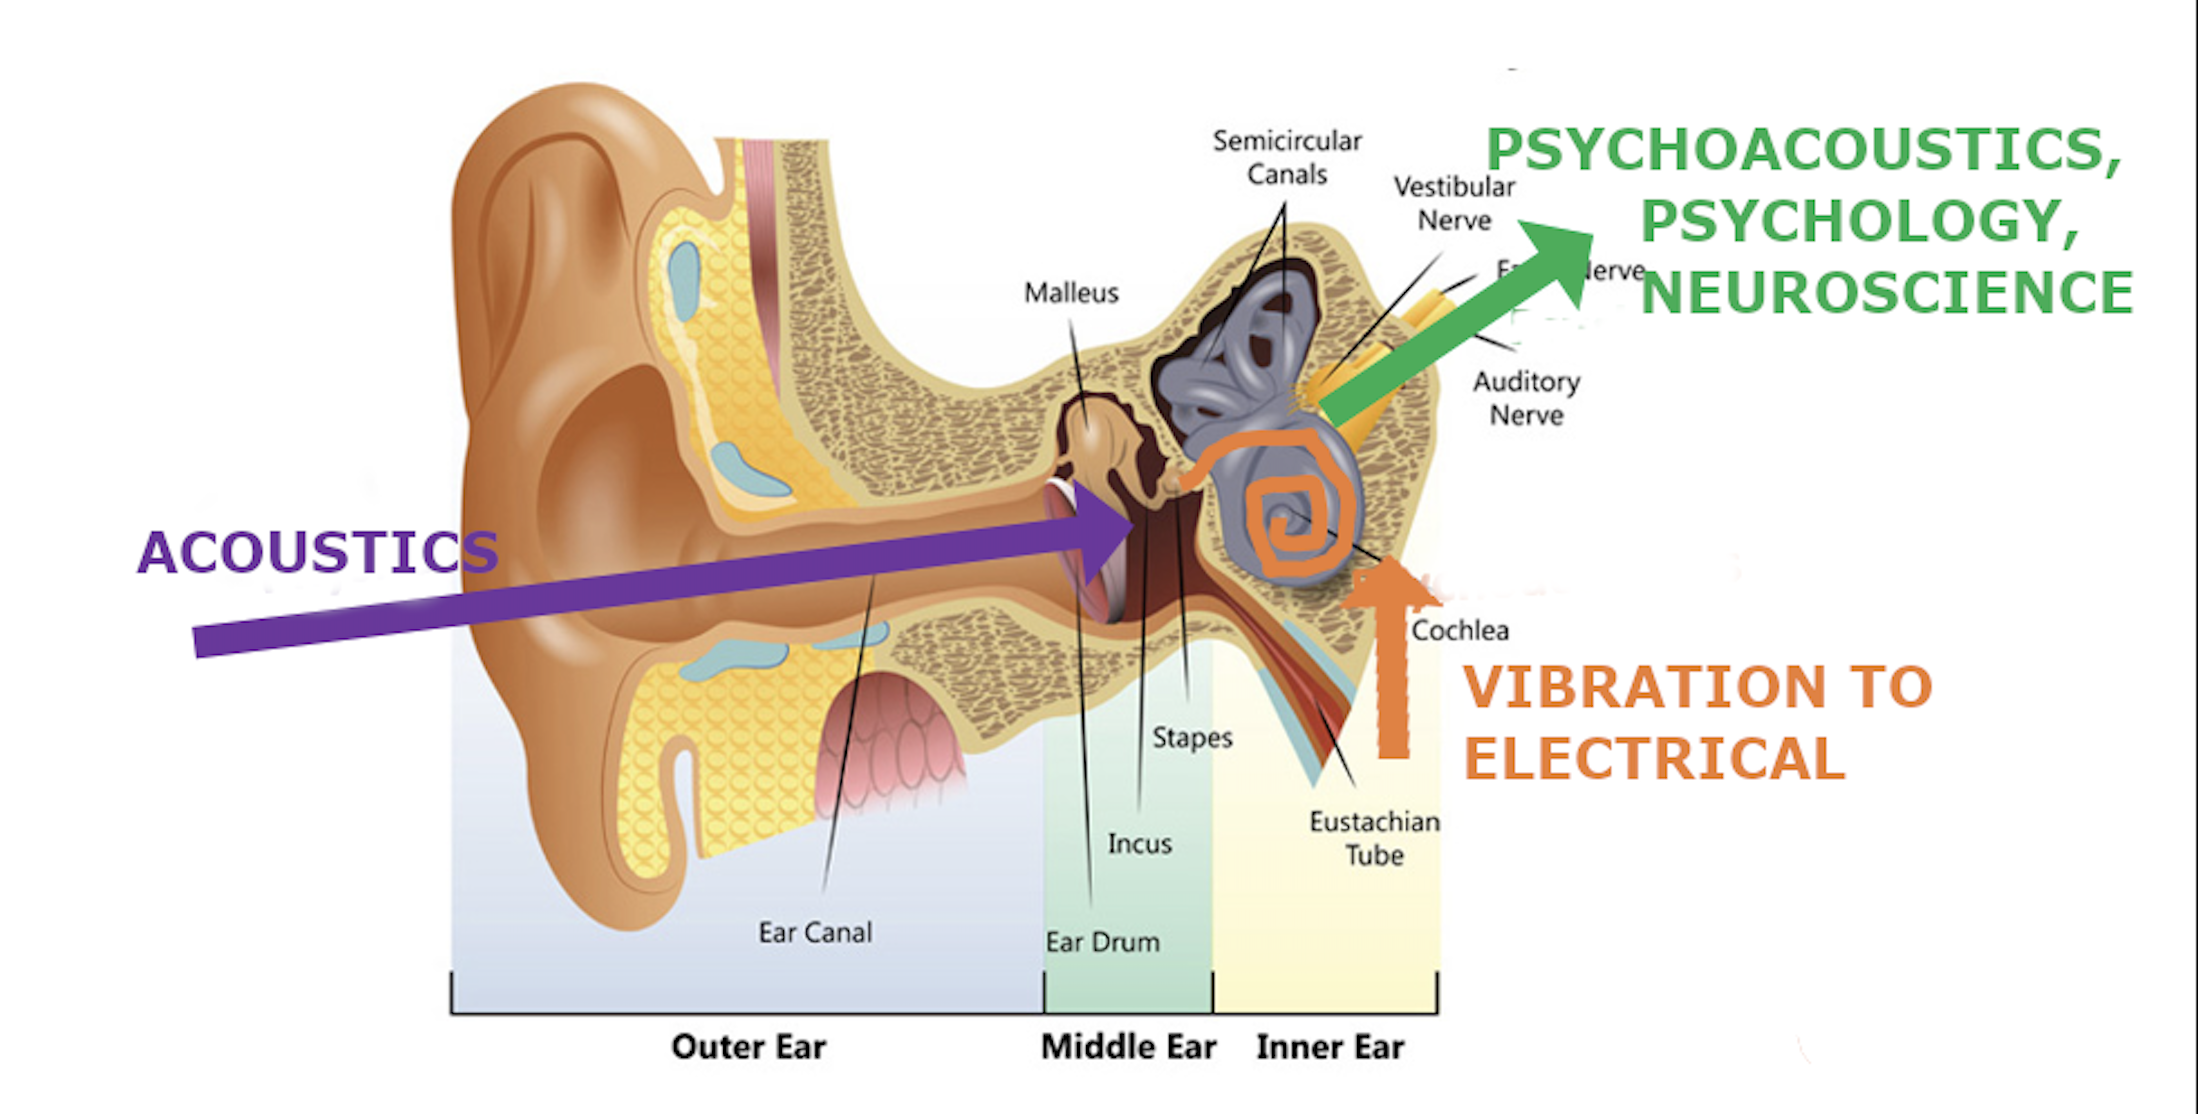 Diagram showing the human hearing system divided into three functions.